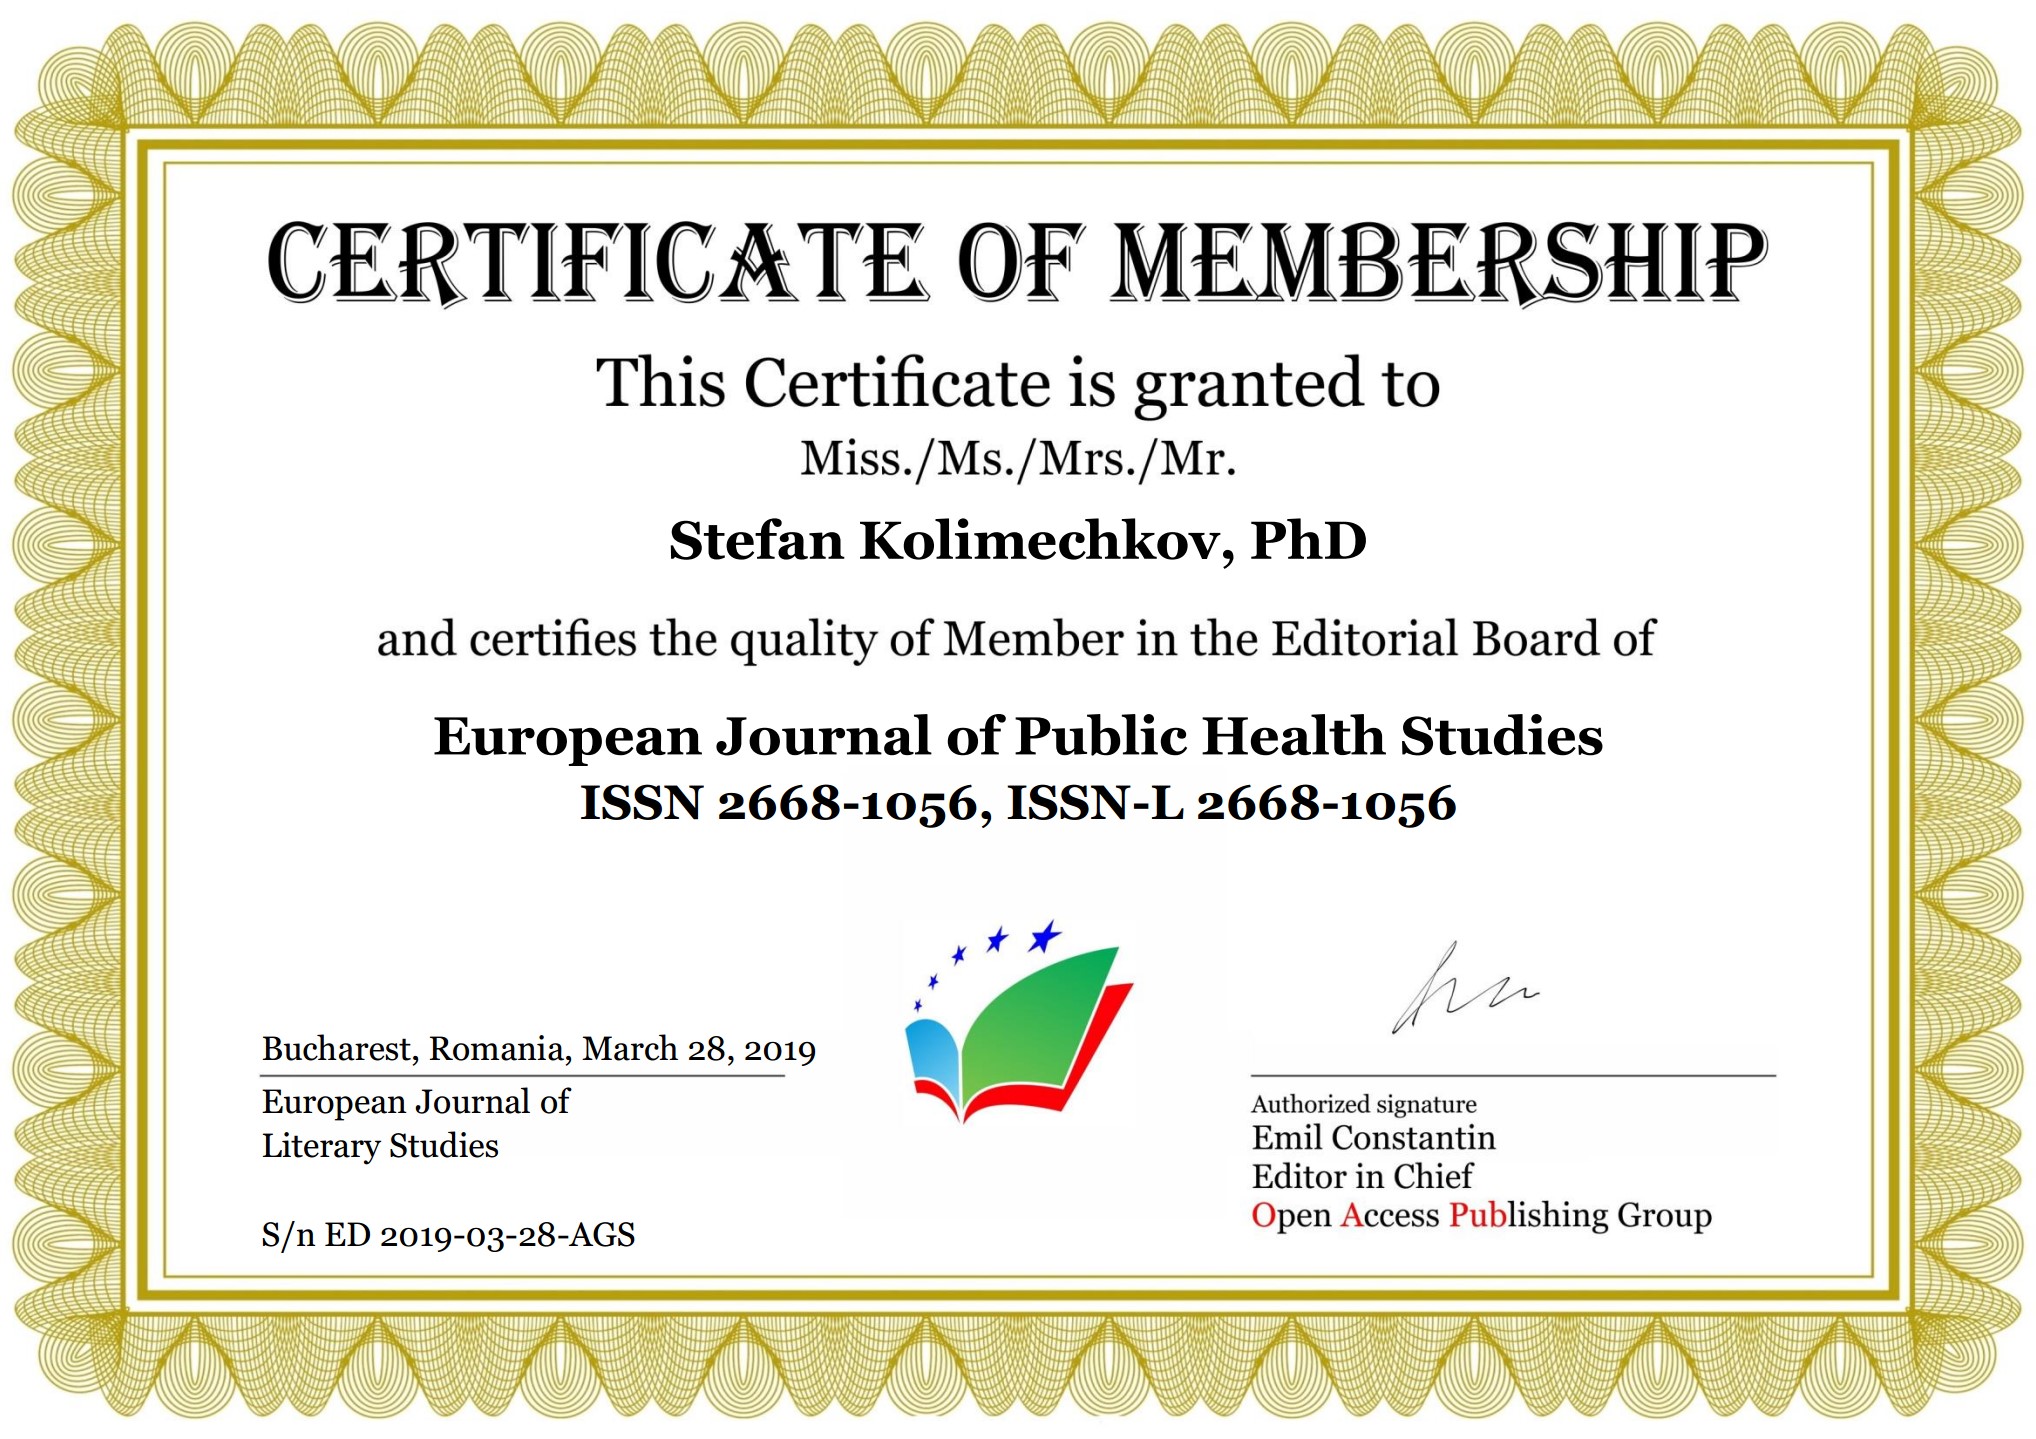 Dr Stefan Kolimechkov is the Editor-in-Chief of the European Journal of Public Health Studies (ISSN: 2668-1056)